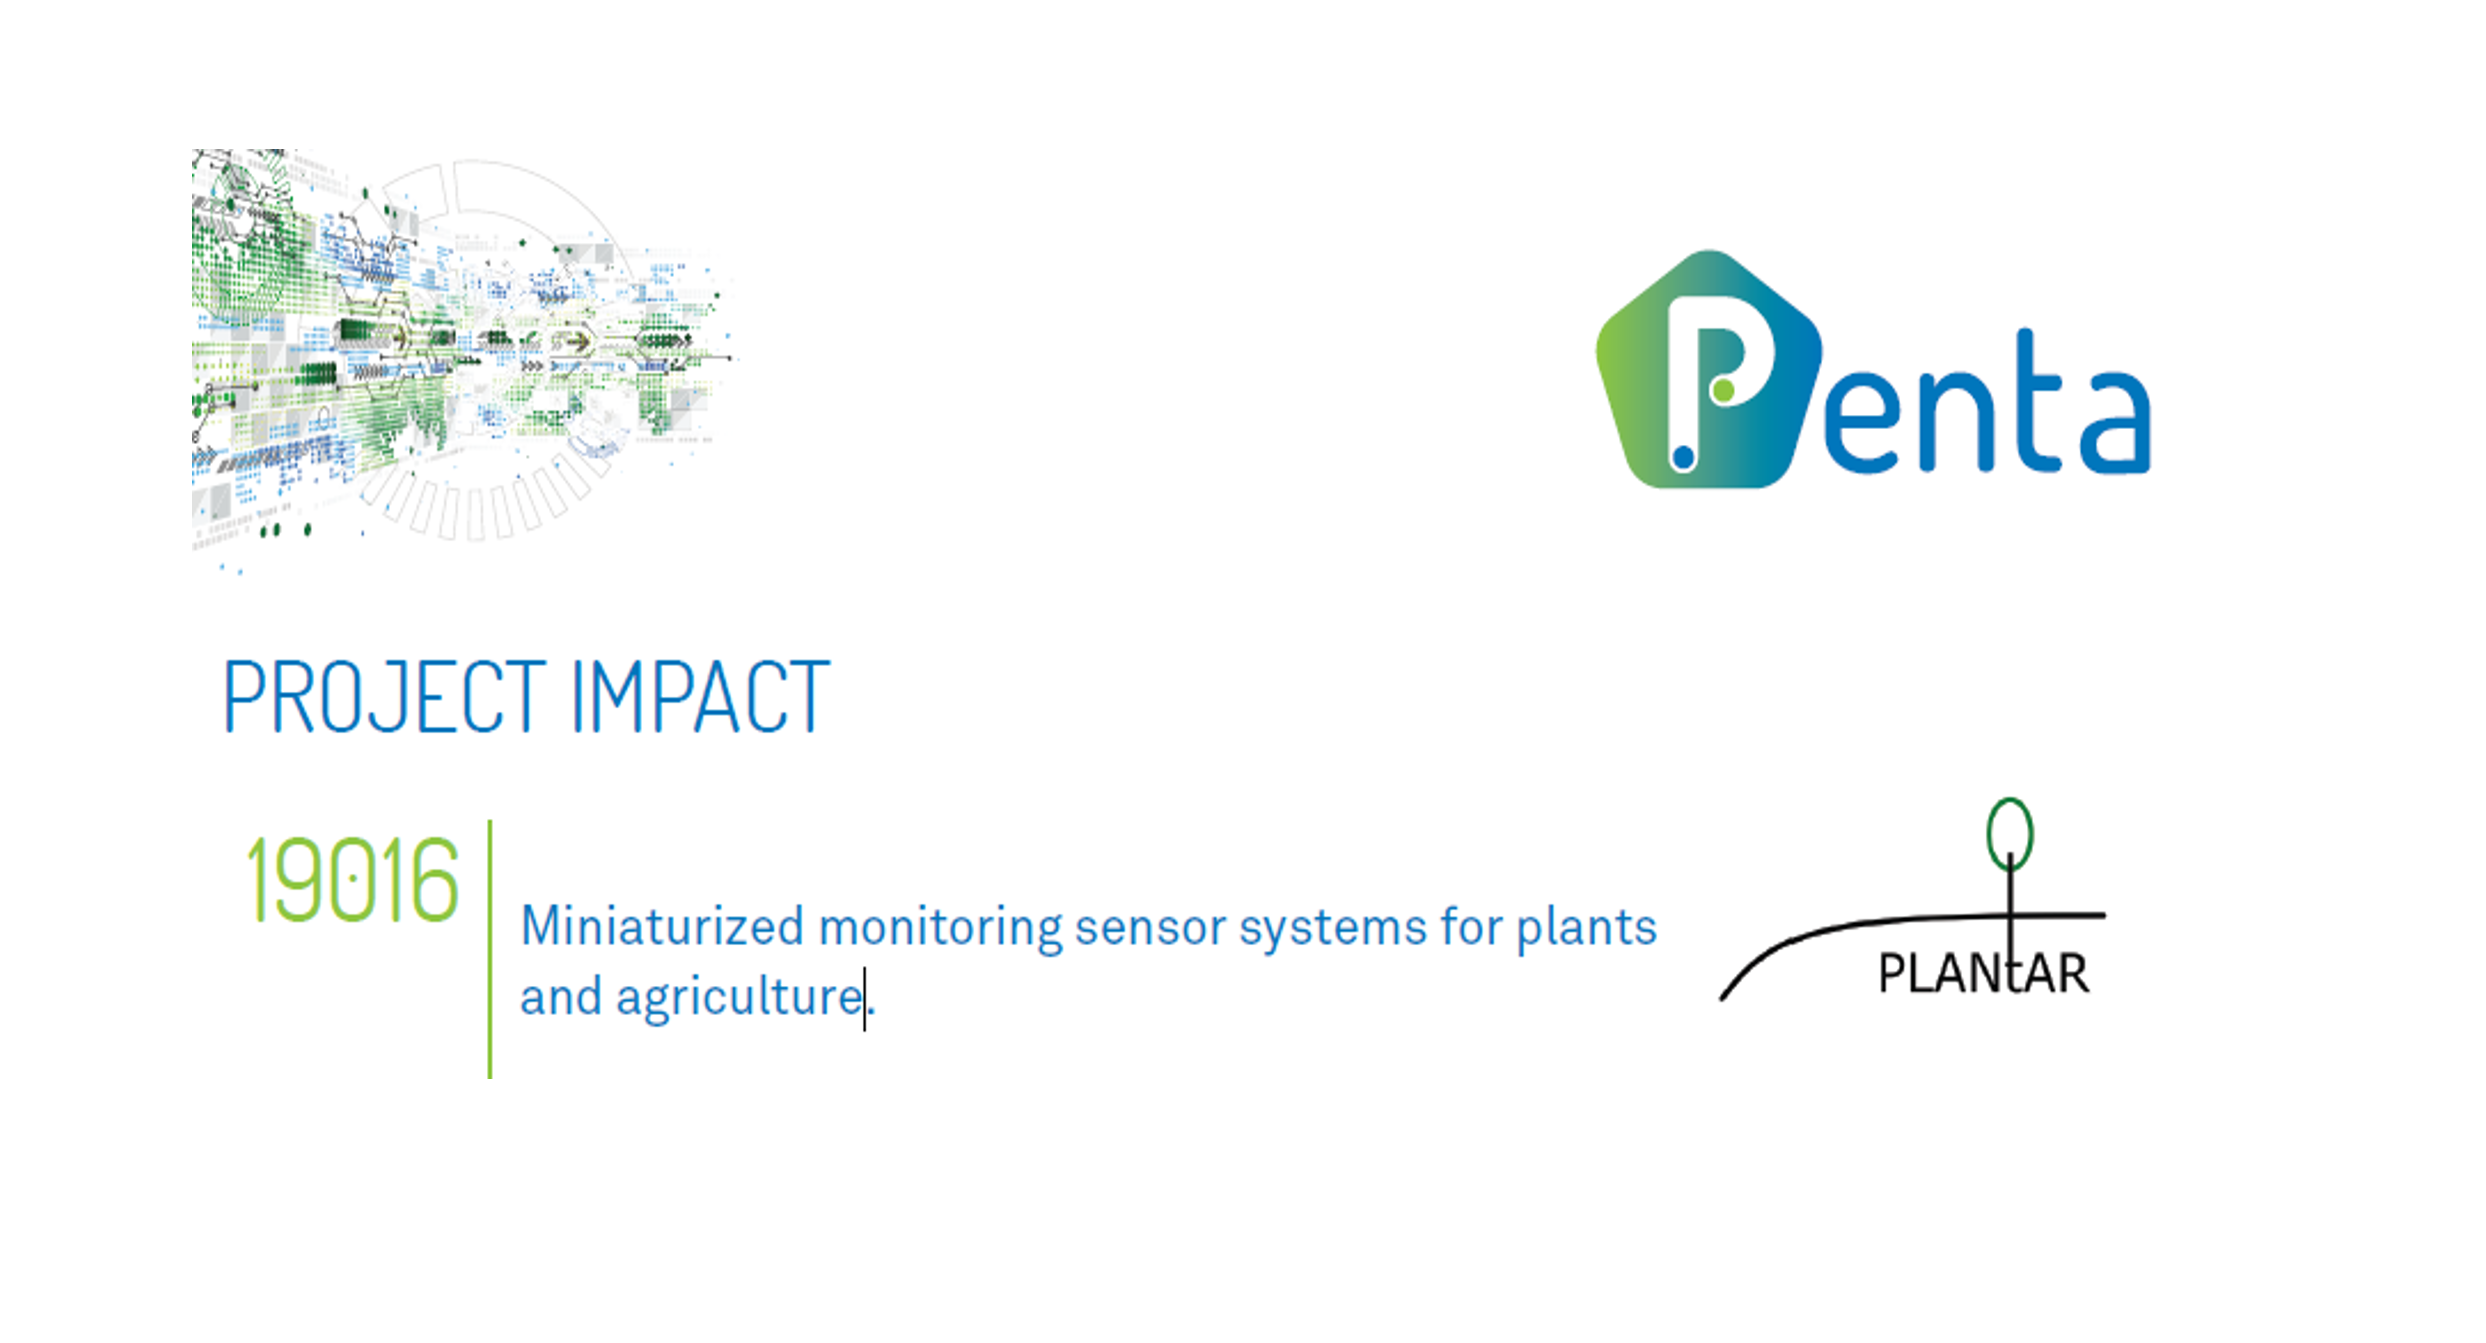 Miniaturized monitoring sensor systems for plants and agriculture - Discover the PLANtAR Project Impact